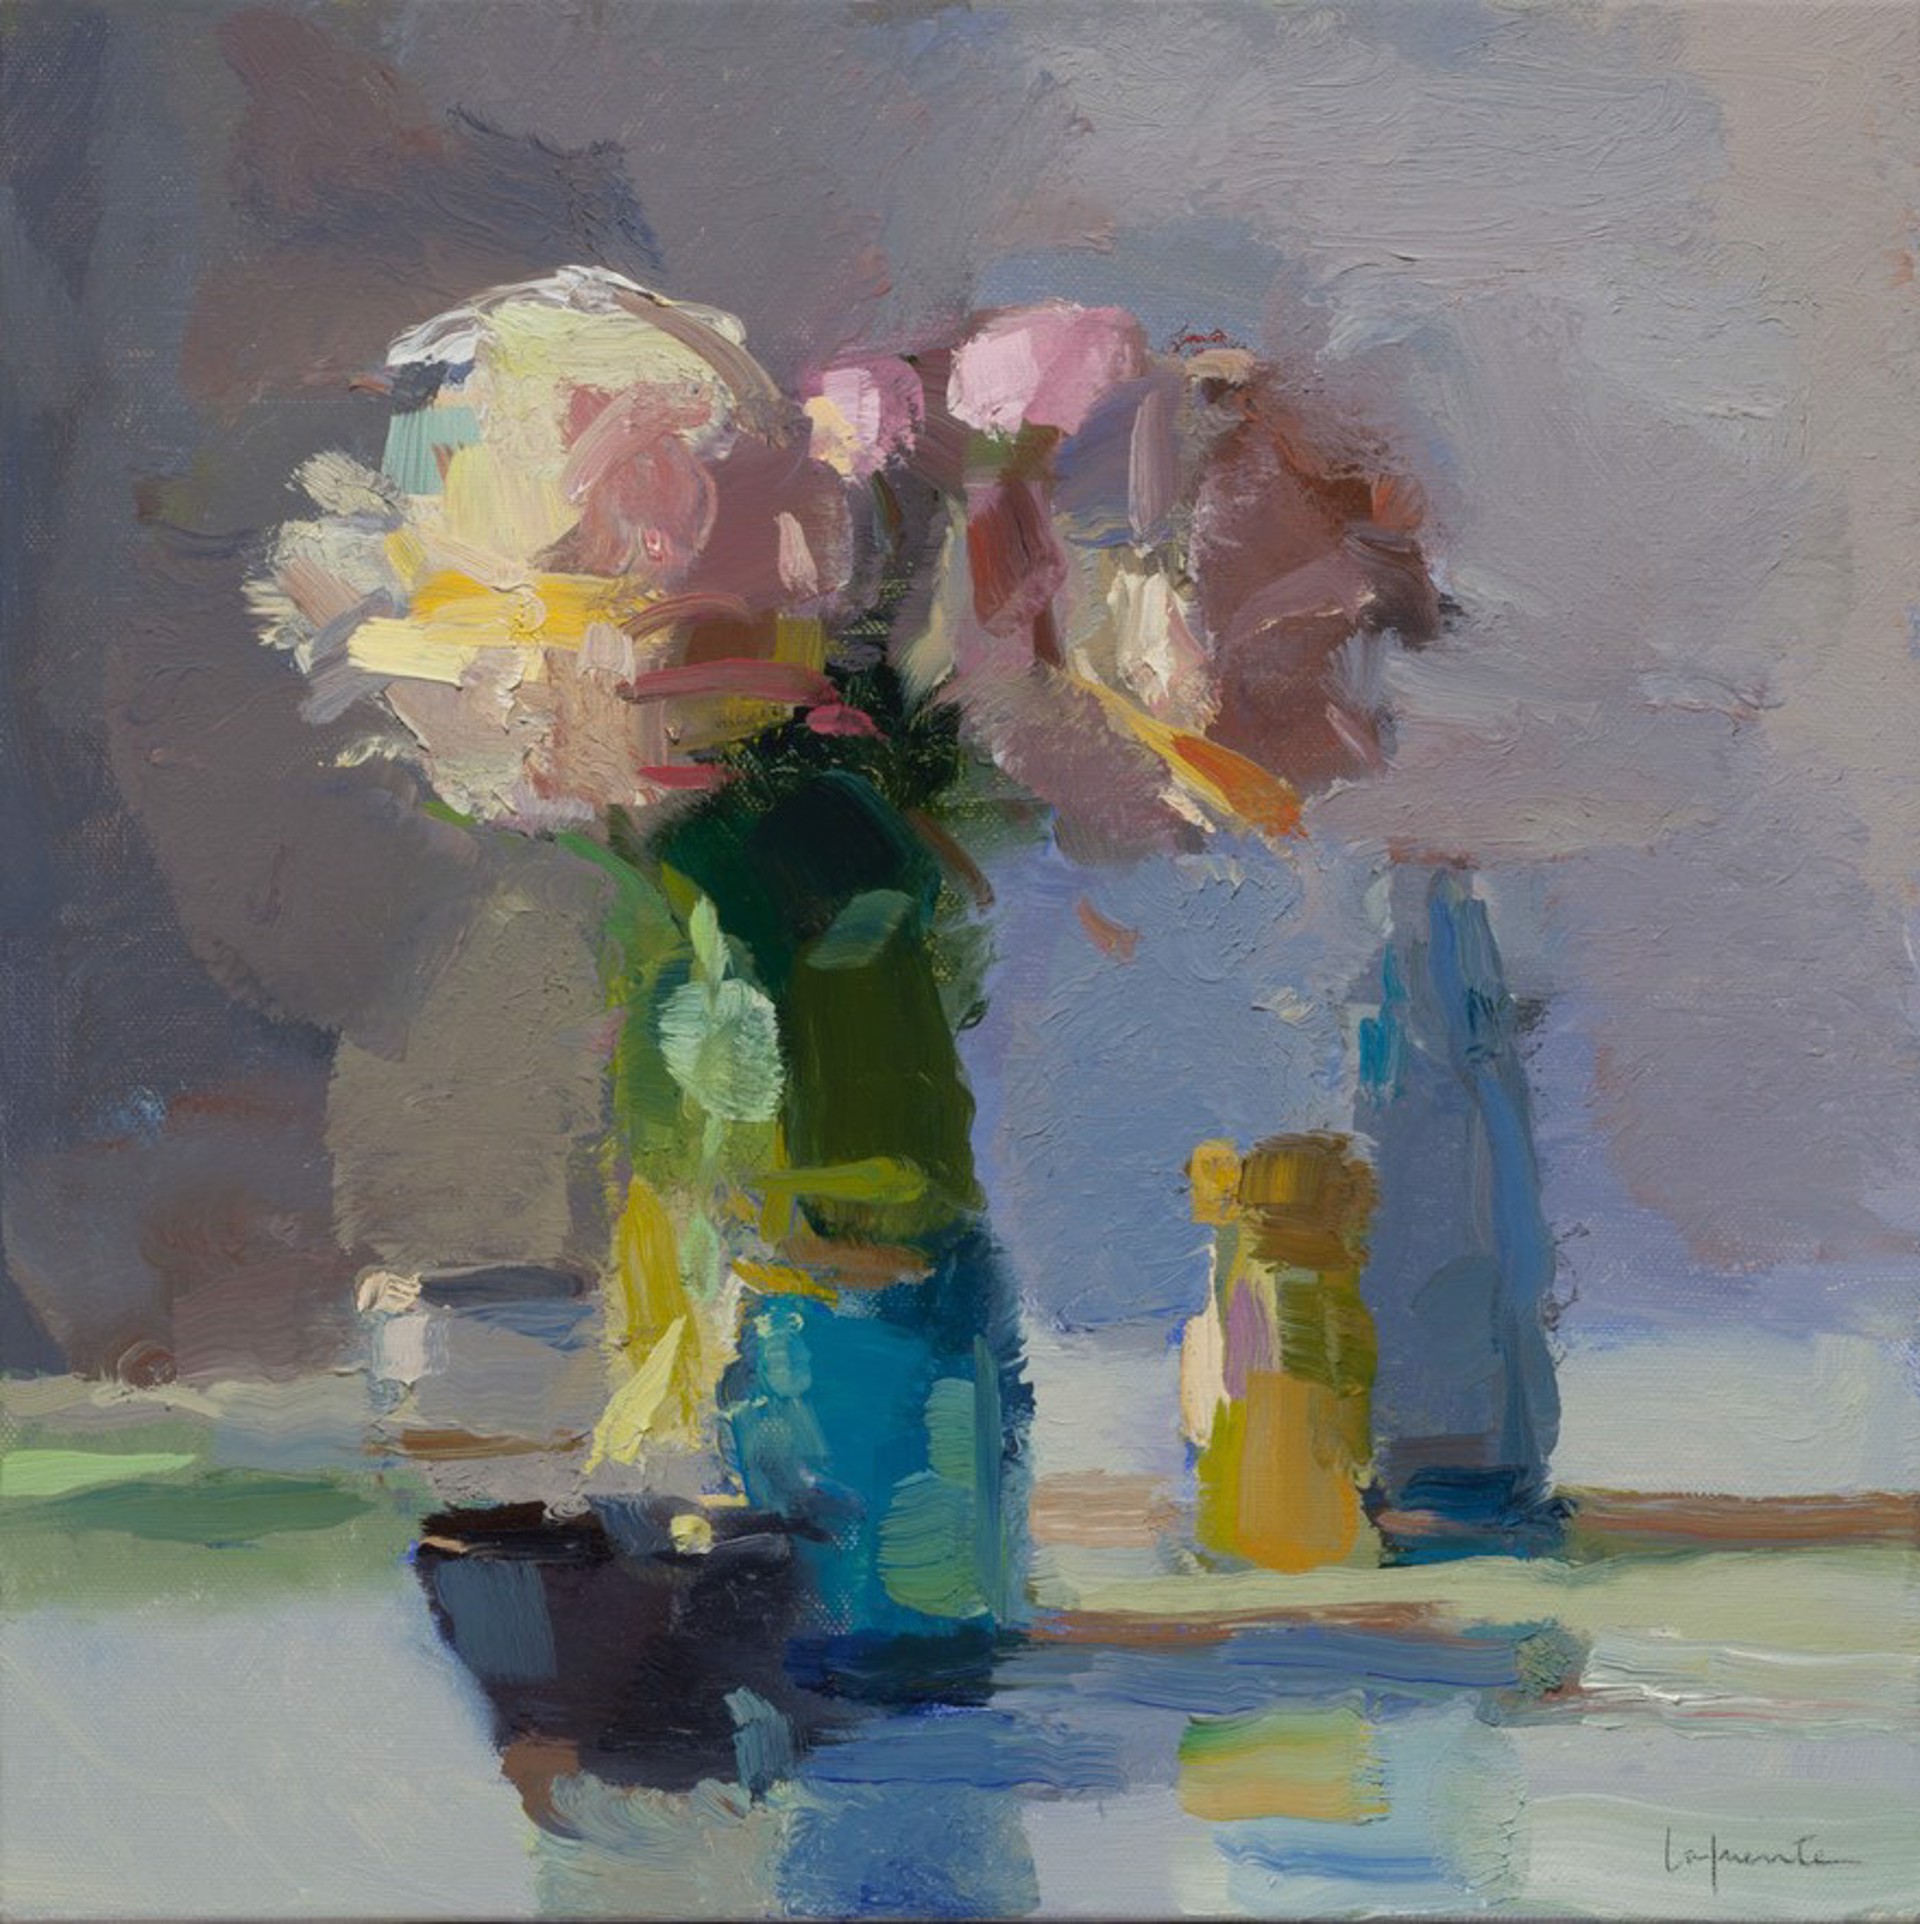 PEONIES, CUPS AND BOTTLES by CHRISTINE LAFUENTE